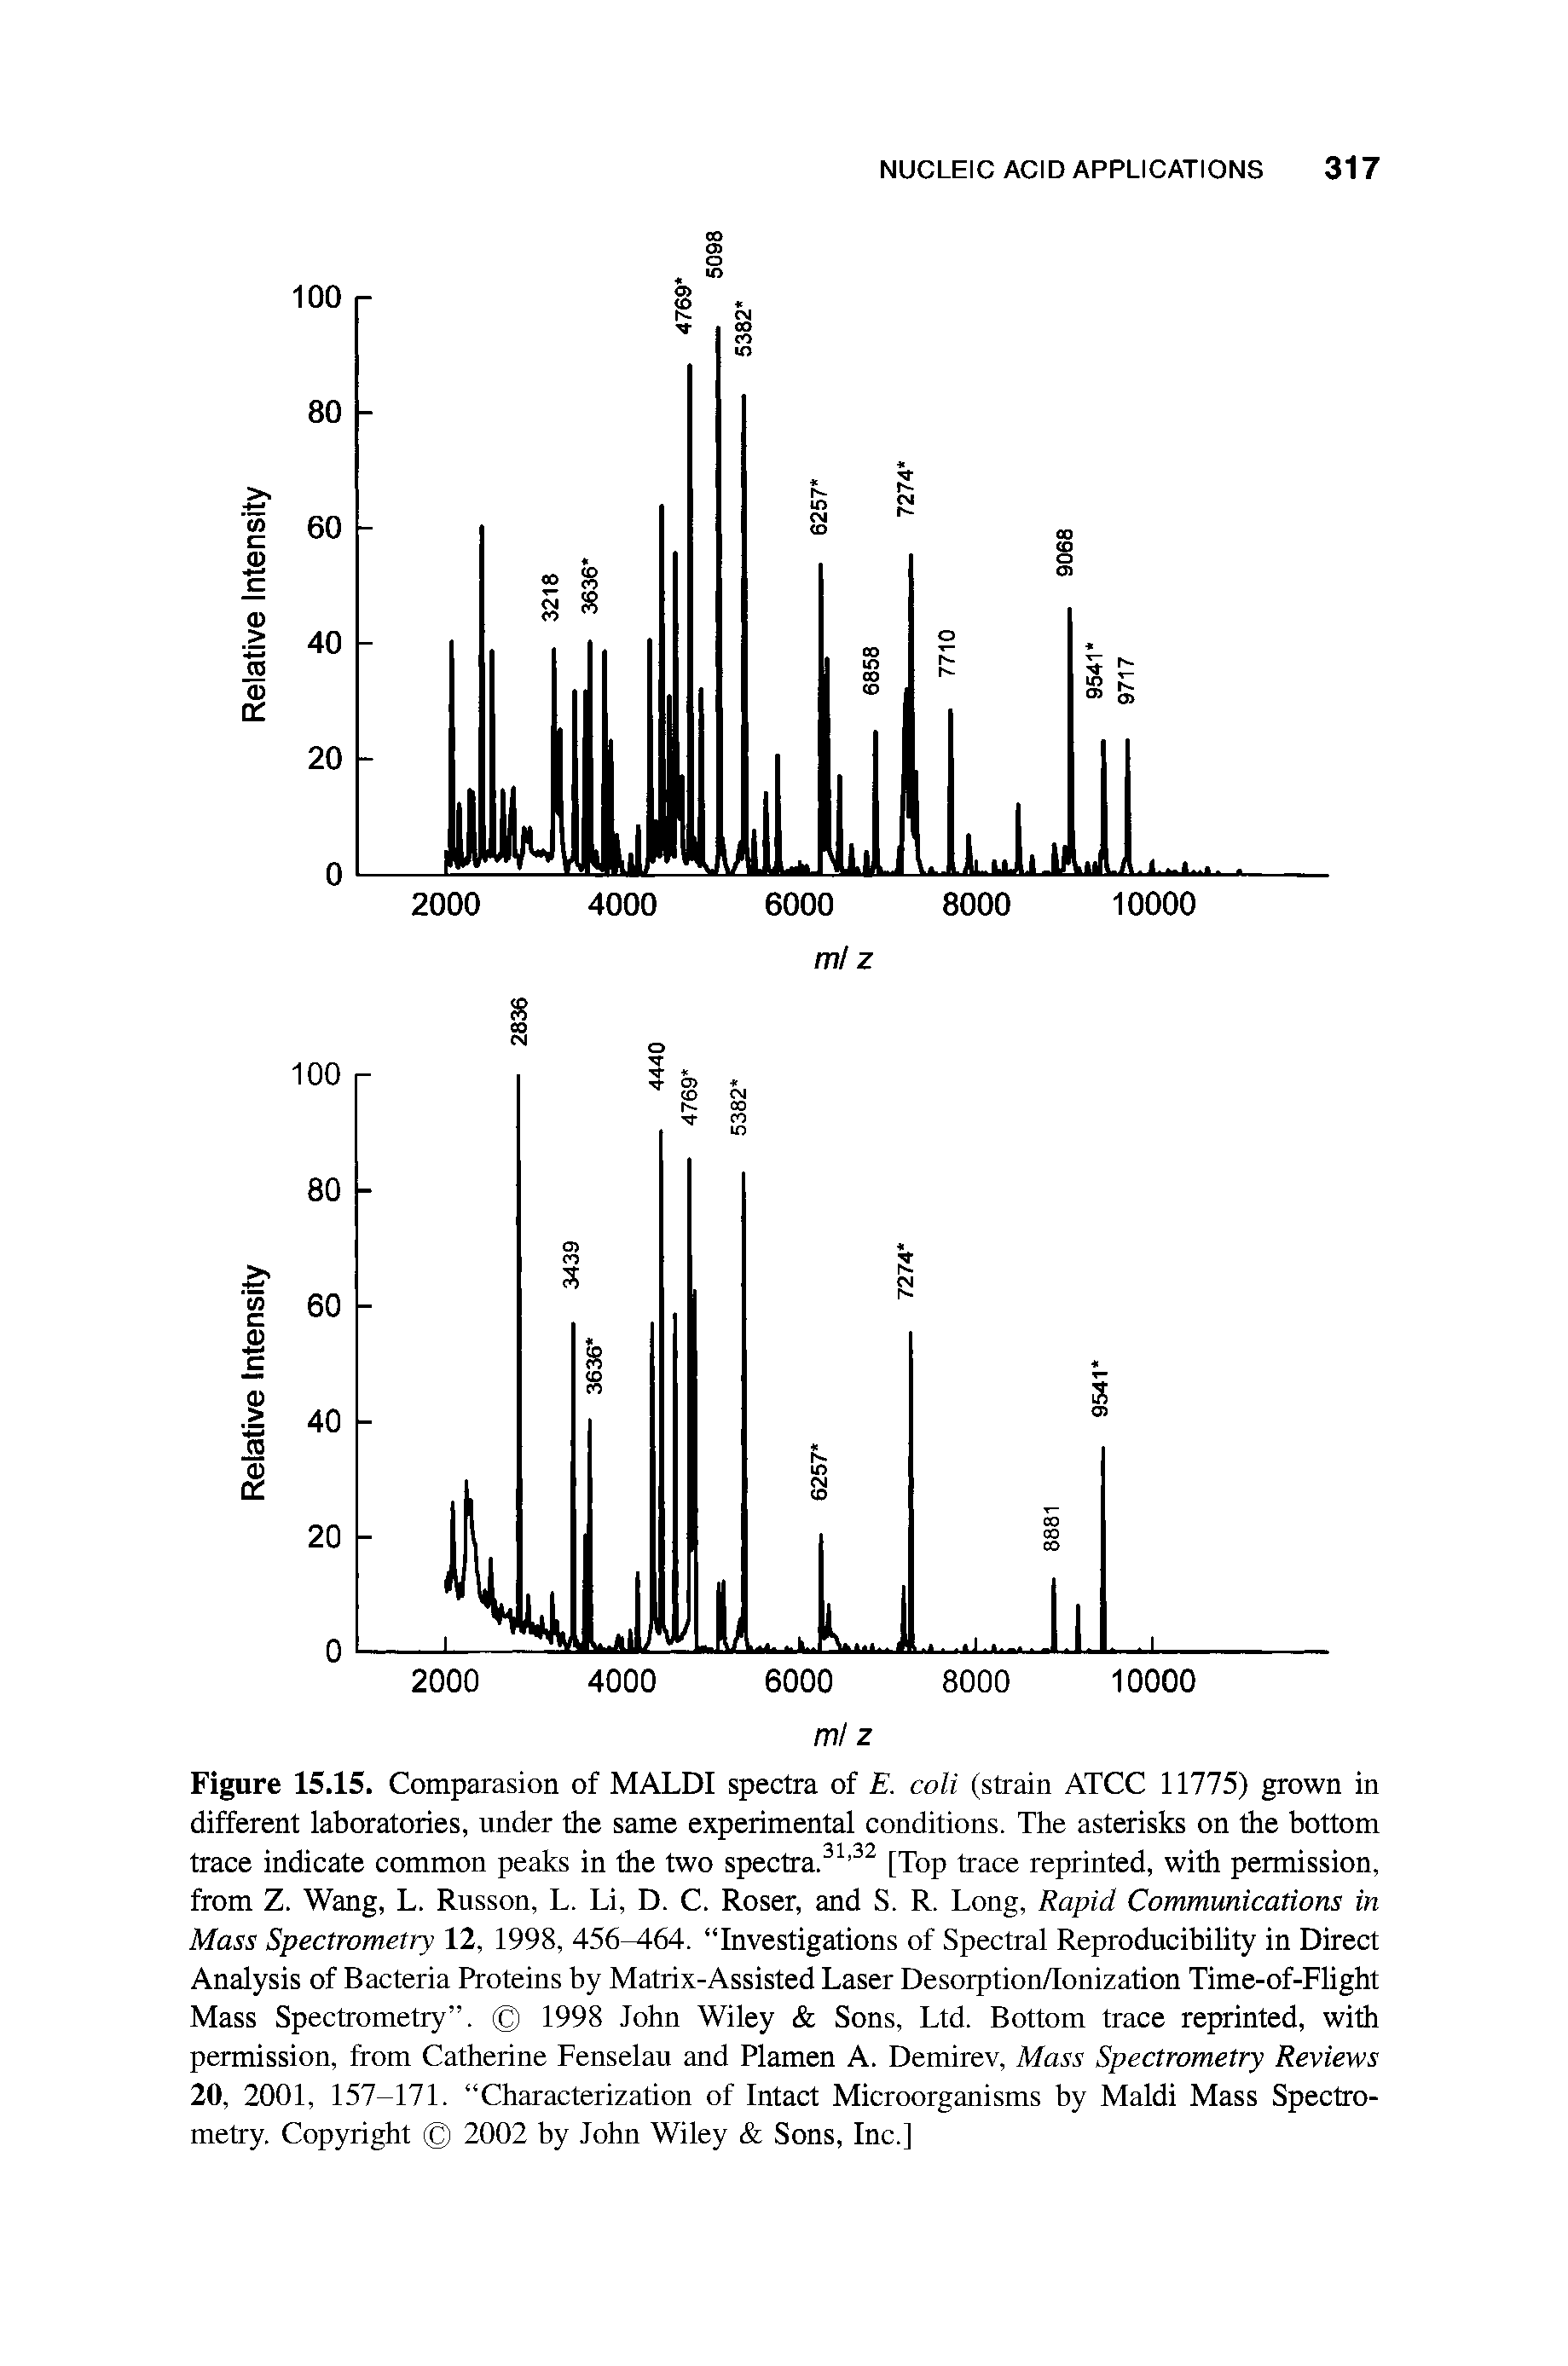 Figure 15.15. Comparasion of MALDI spectra of E. coli (strain ATCC 11775) grown in different laboratories, under the same experimental conditions. The asterisks on the bottom trace indicate common peaks in the two spectra.31,32 [Top trace reprinted, with permission, from Z. Wang, L. Russon, L. Li, D. C. Roser, and S. R. Long, Rapid Communications in Mass Spectrometry 12, 1998, 456 -64. Investigations of Spectral Reproducibility in Direct Analysis of Bacteria Proteins by Matrix-Assisted Laser Desorption/Ionization Time-of-Flight Mass Spectrometry . 1998 John Wiley Sons, Ltd. Bottom trace reprinted, with permission, from Catherine Fenselau and Plamen A. Demirev, Mass Spectrometry Reviews 20, 2001, 157-171. Characterization of Intact Microorganisms by Maldi Mass Spectrometry. Copyright 2002 by John Wiley Sons, Inc.]...